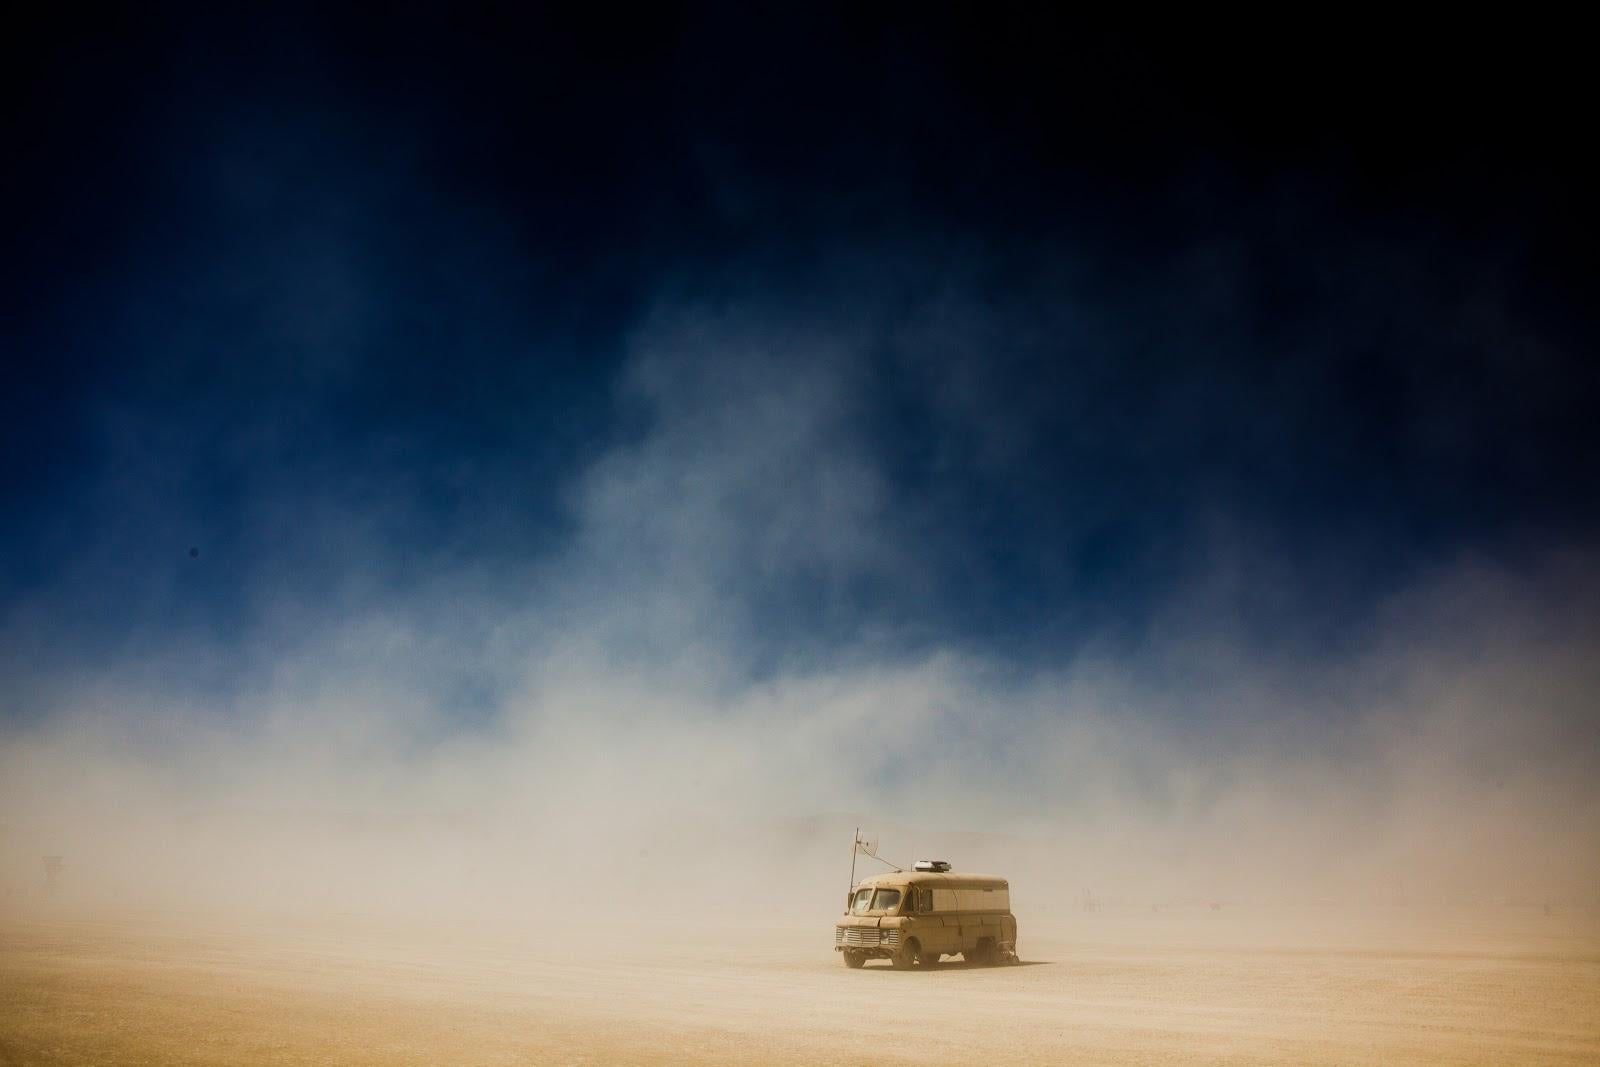 Tao Ruspoli Color Photograph - Mad Max (Burning Man), 21st Century, Landscape Photography, Contemporary, Color